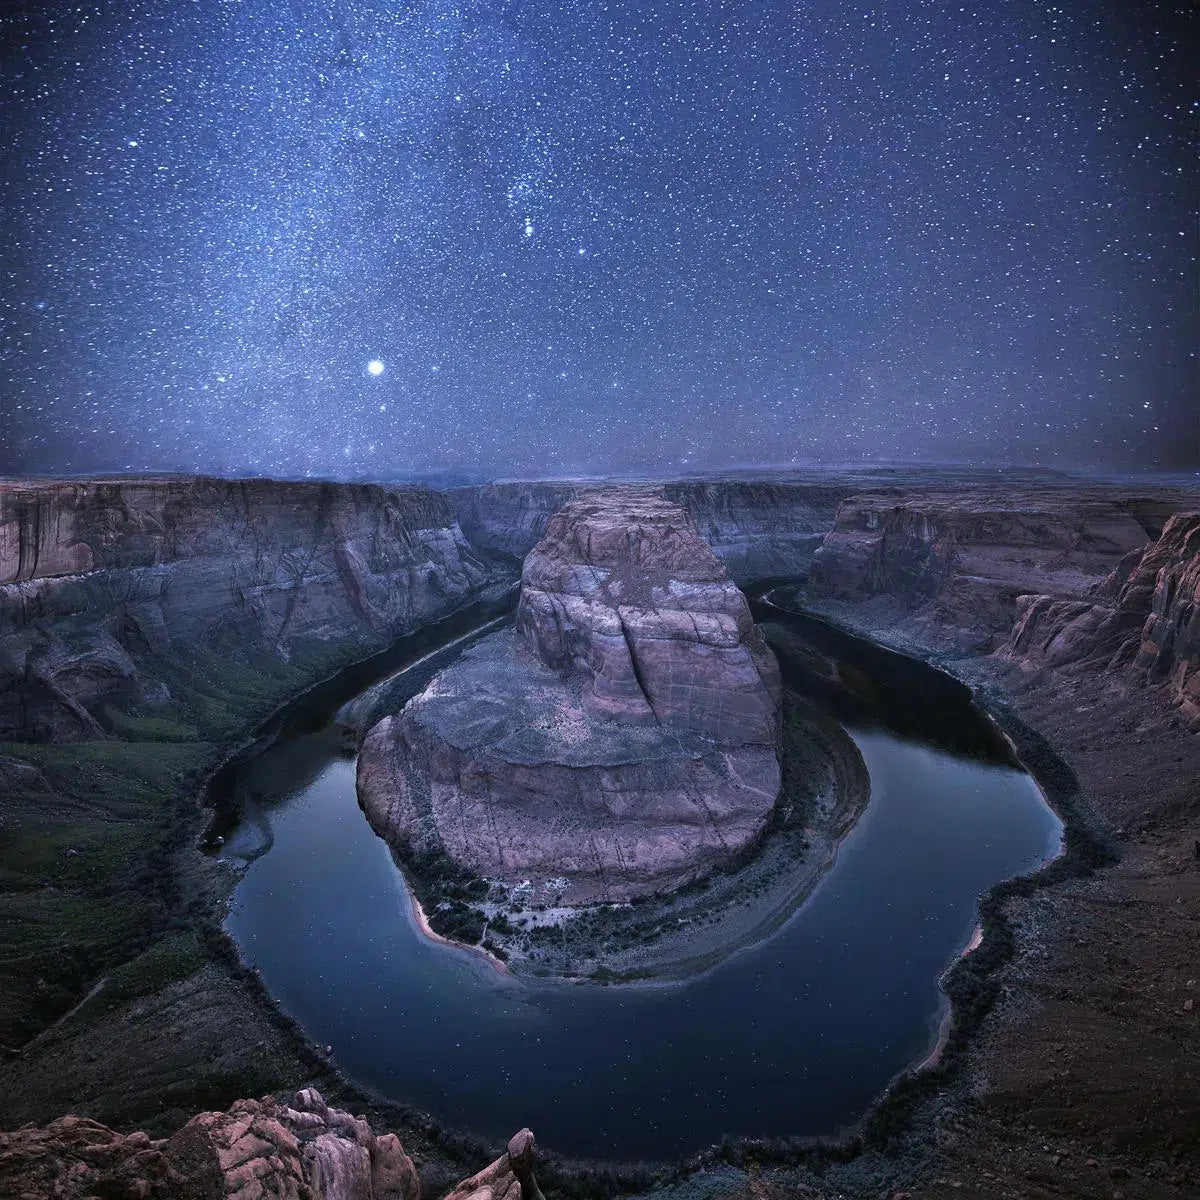 An Evening at Horseshoe Bend, by Rick Rose-PurePhoto